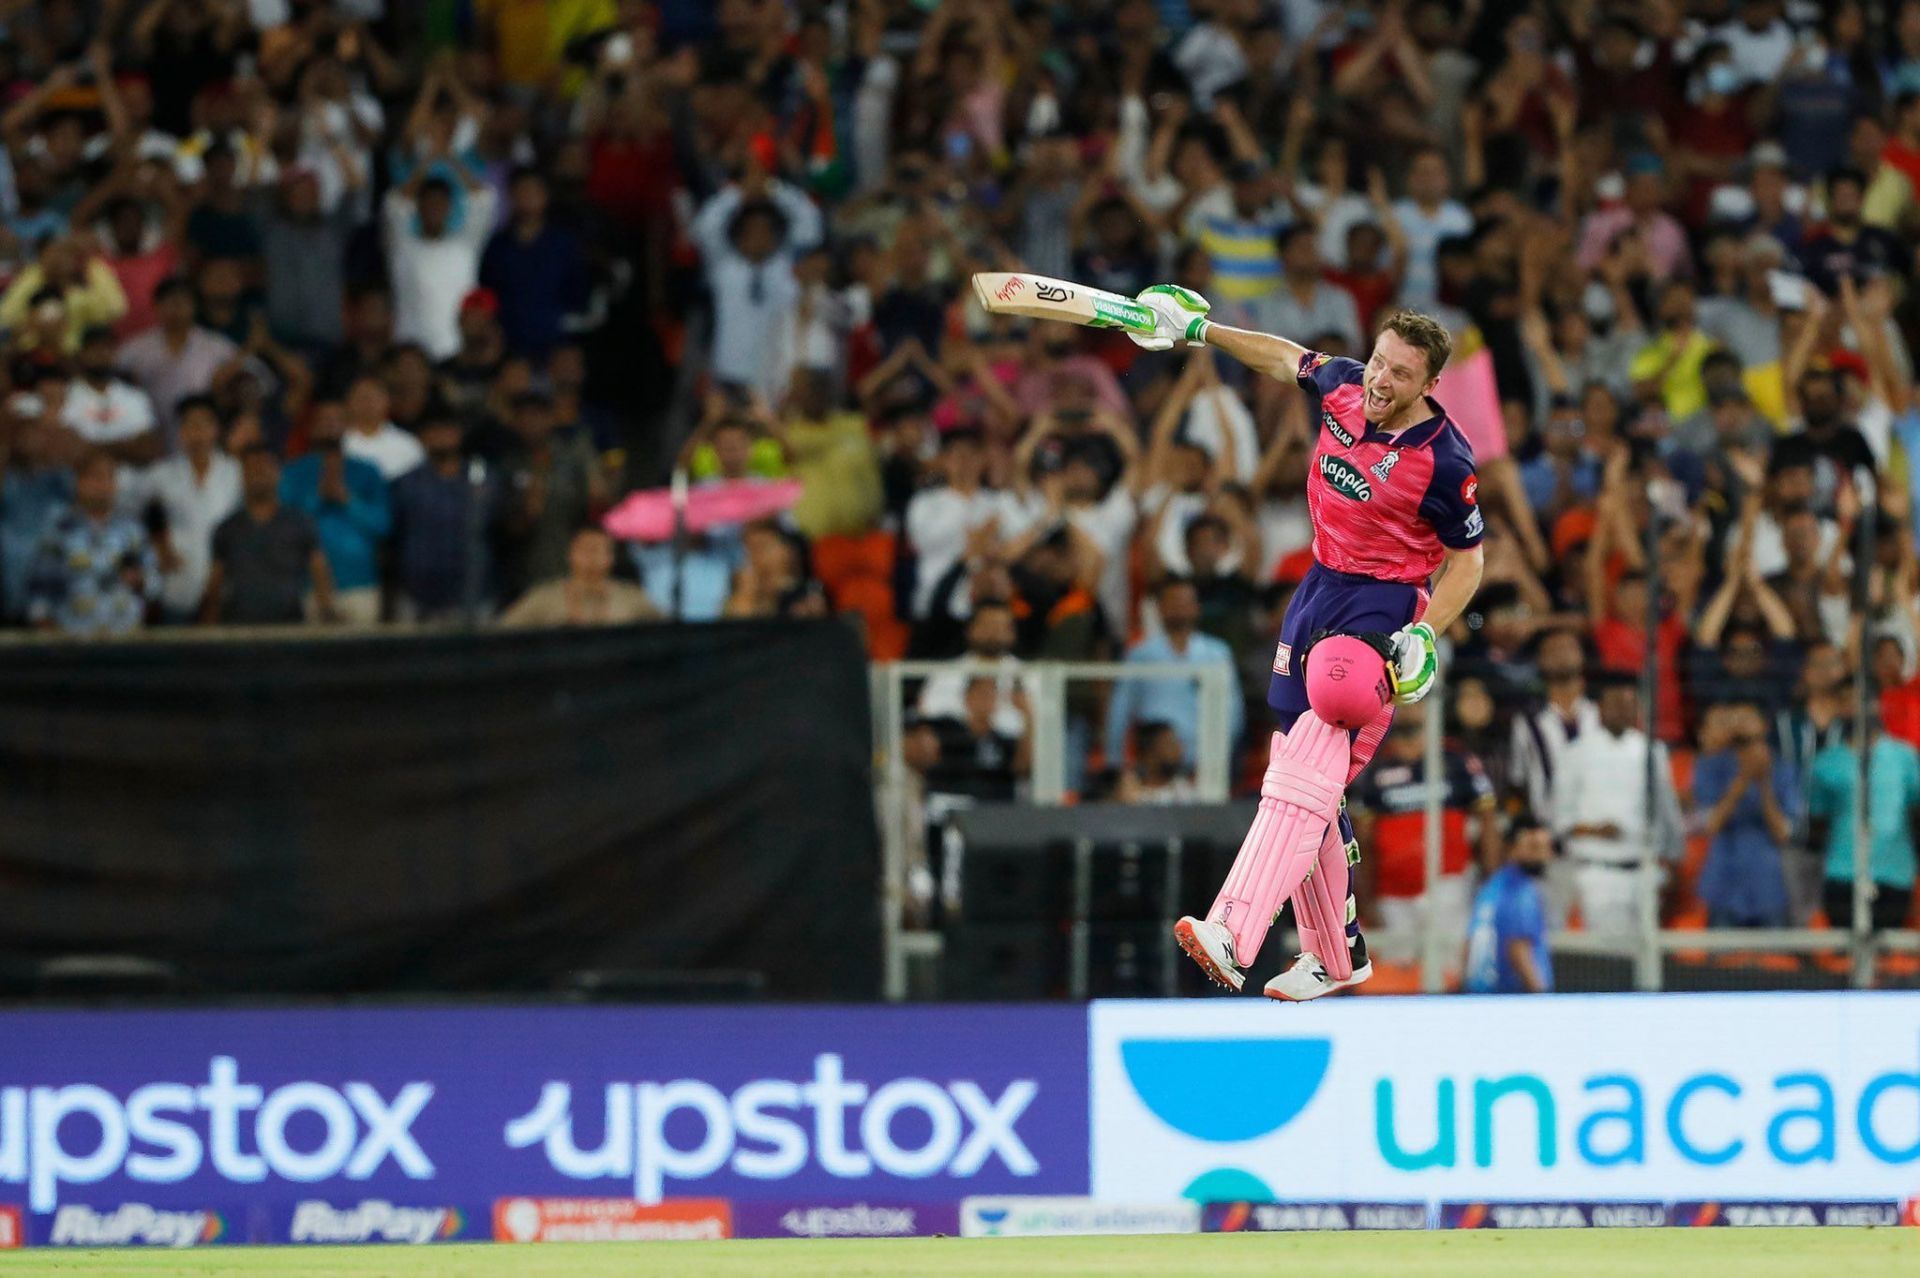 Jos Buttler had a memorable IPL 2022 with the bat. (Credits: Getty)